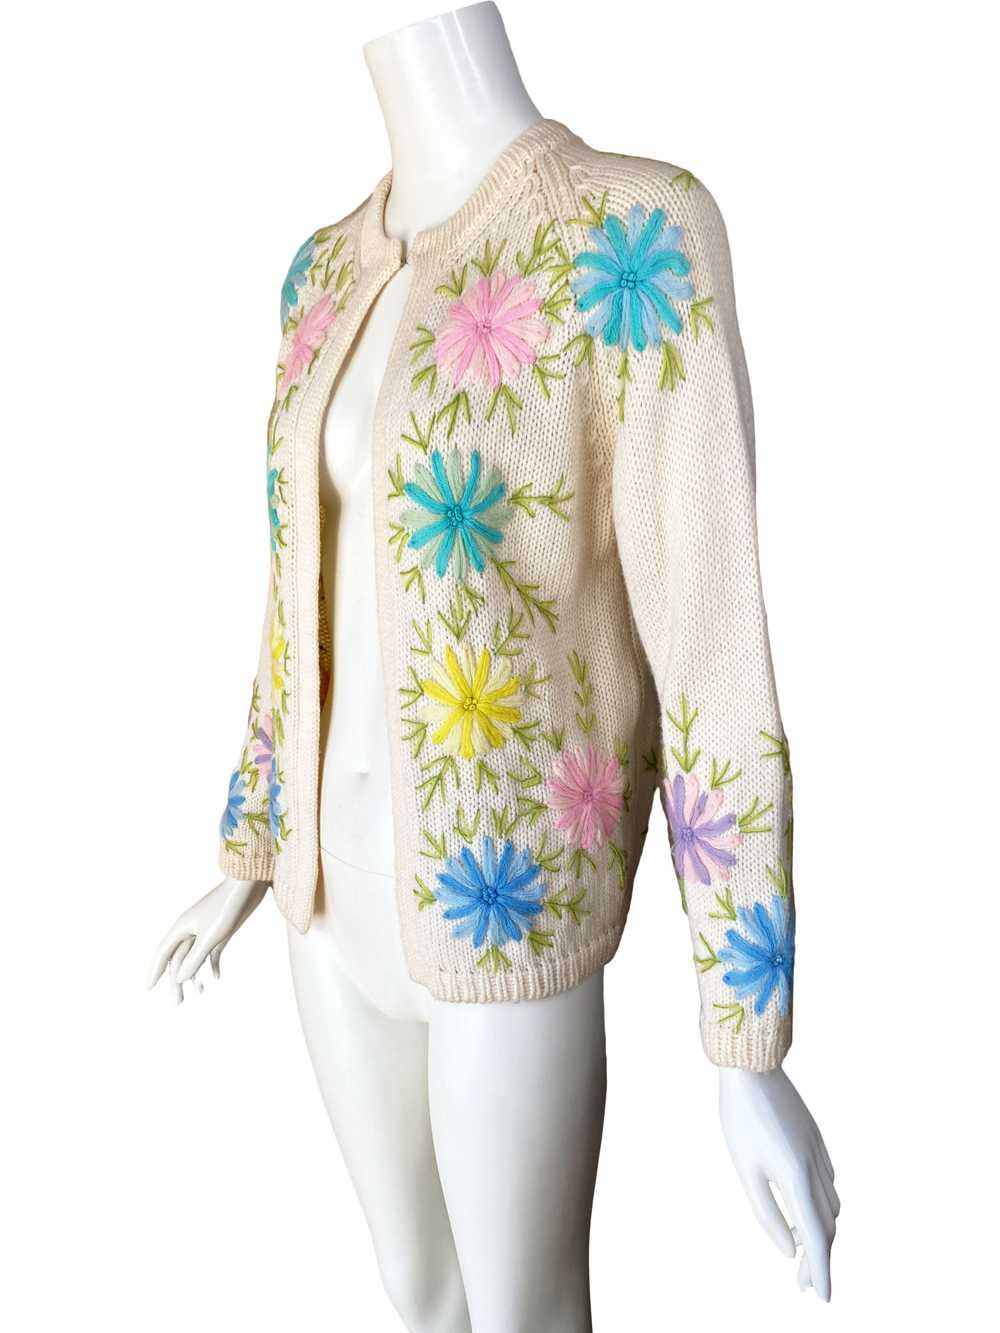 1960s Pastel Embroidered Cardgan - image 2